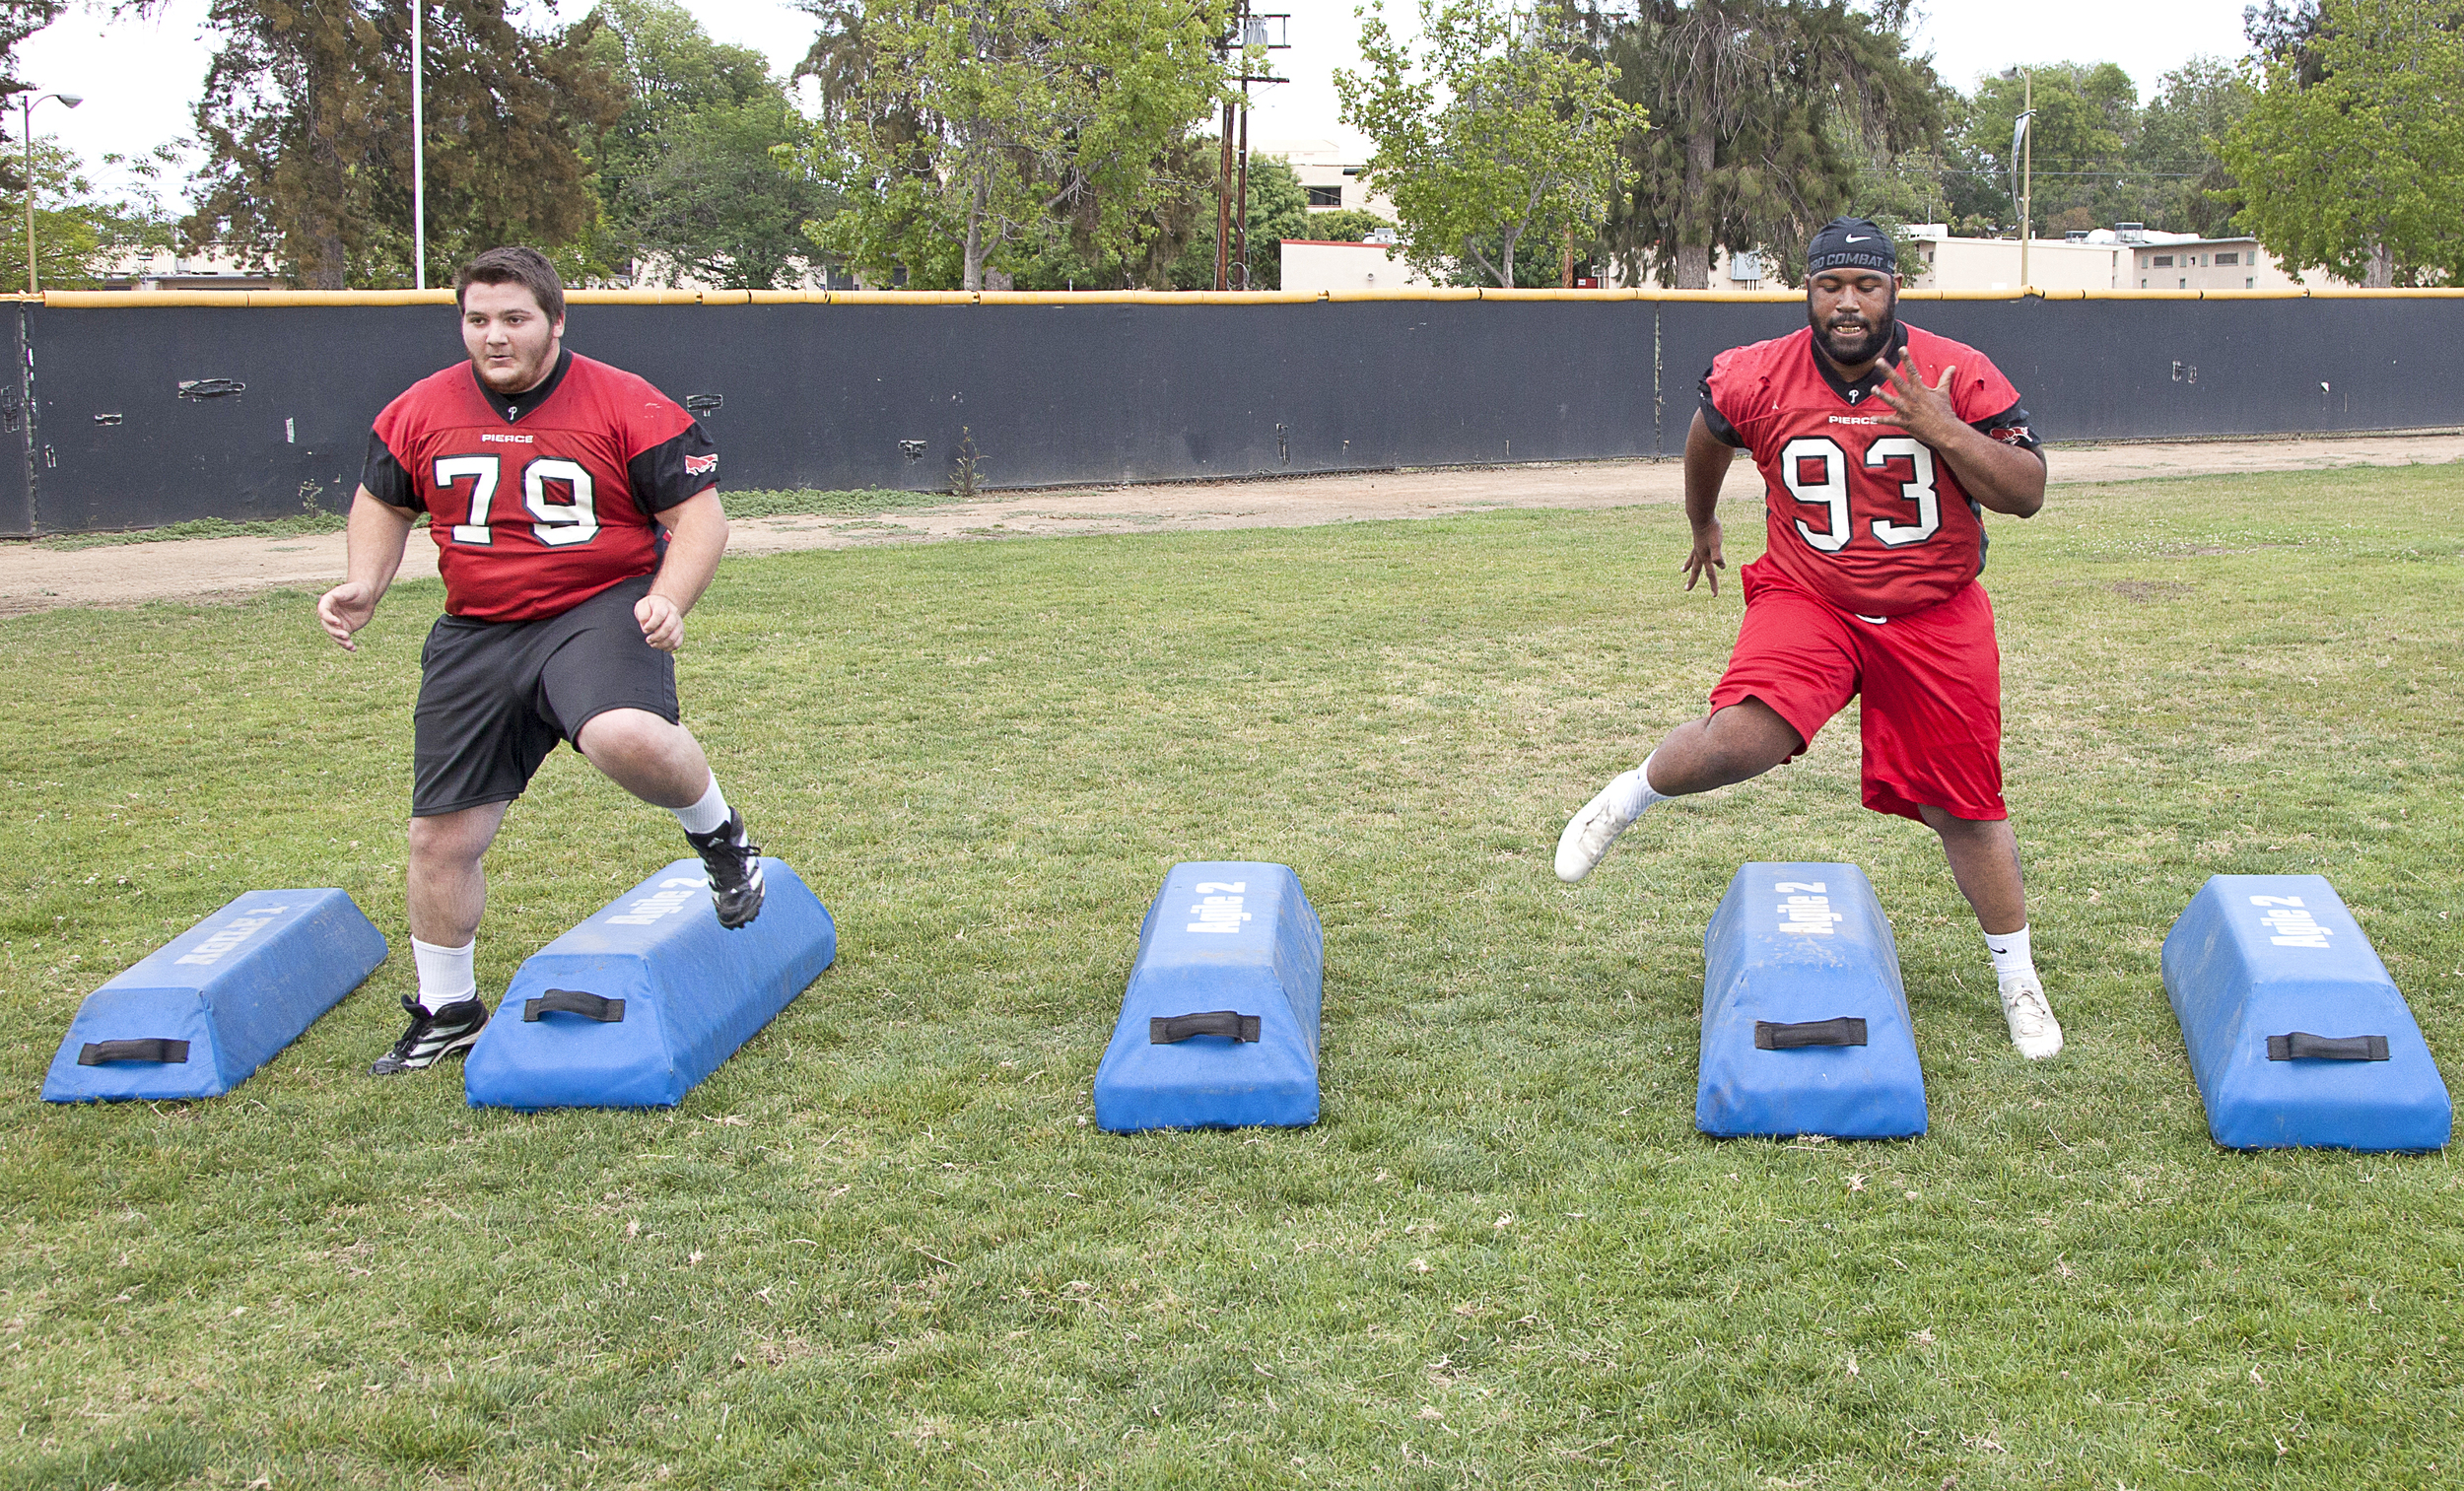  Defensive tackles Sean Grogan and Timothy Clock work on their stamina and footwork during a spring practice and training session on Thursday, May 21, 2015. Woodland Hills, Calif.&nbsp; 